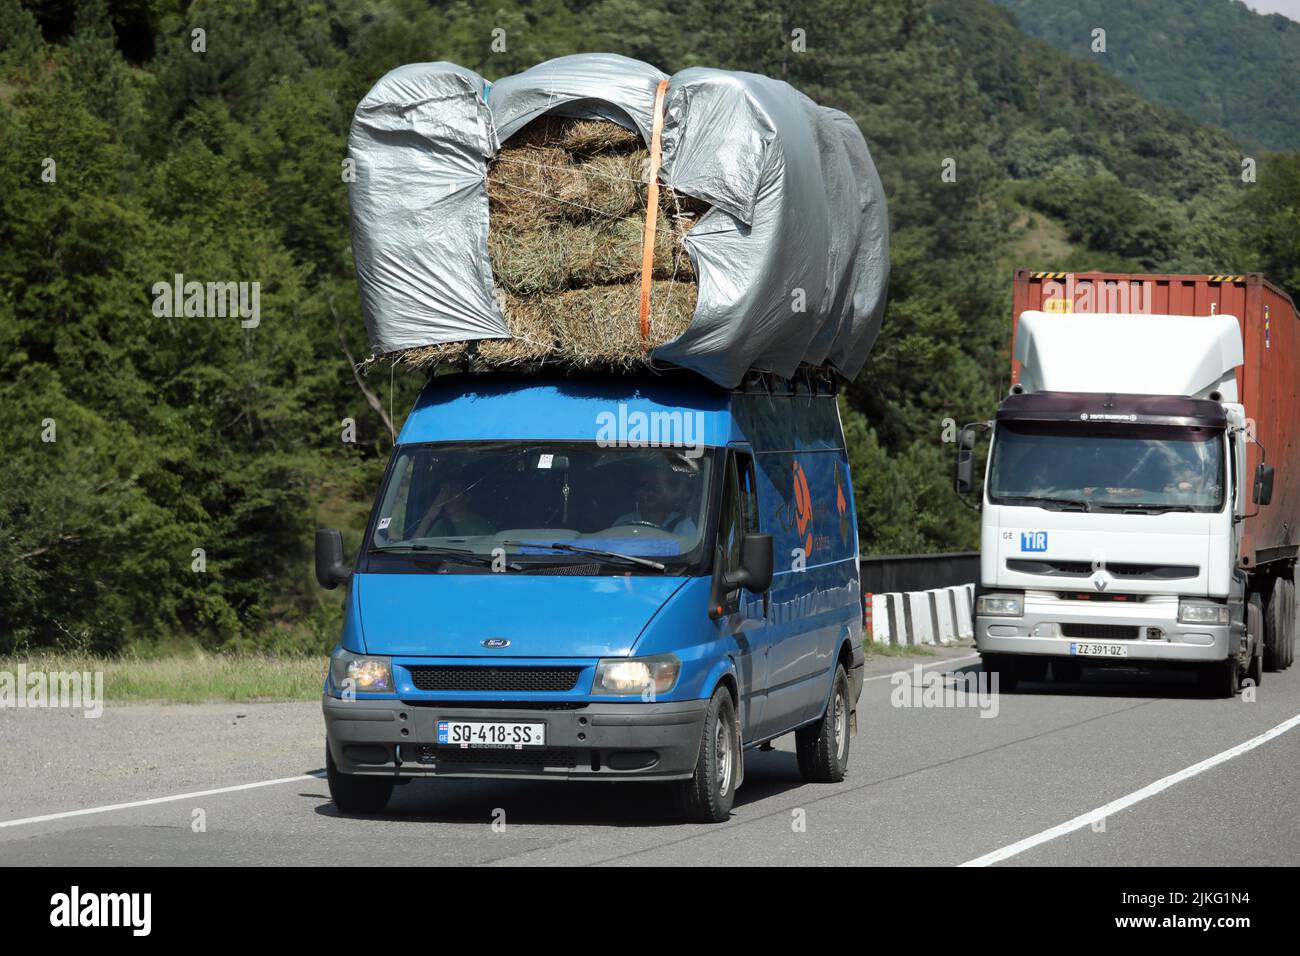 19.07.2018, Georgia, Adjaria, Batumi - Hay bales being transported on the roof of a van. 00S180719D030CAROEX.JPG [MODEL RELEASE: NO, PROPERTY RELEASE: Stock Photo